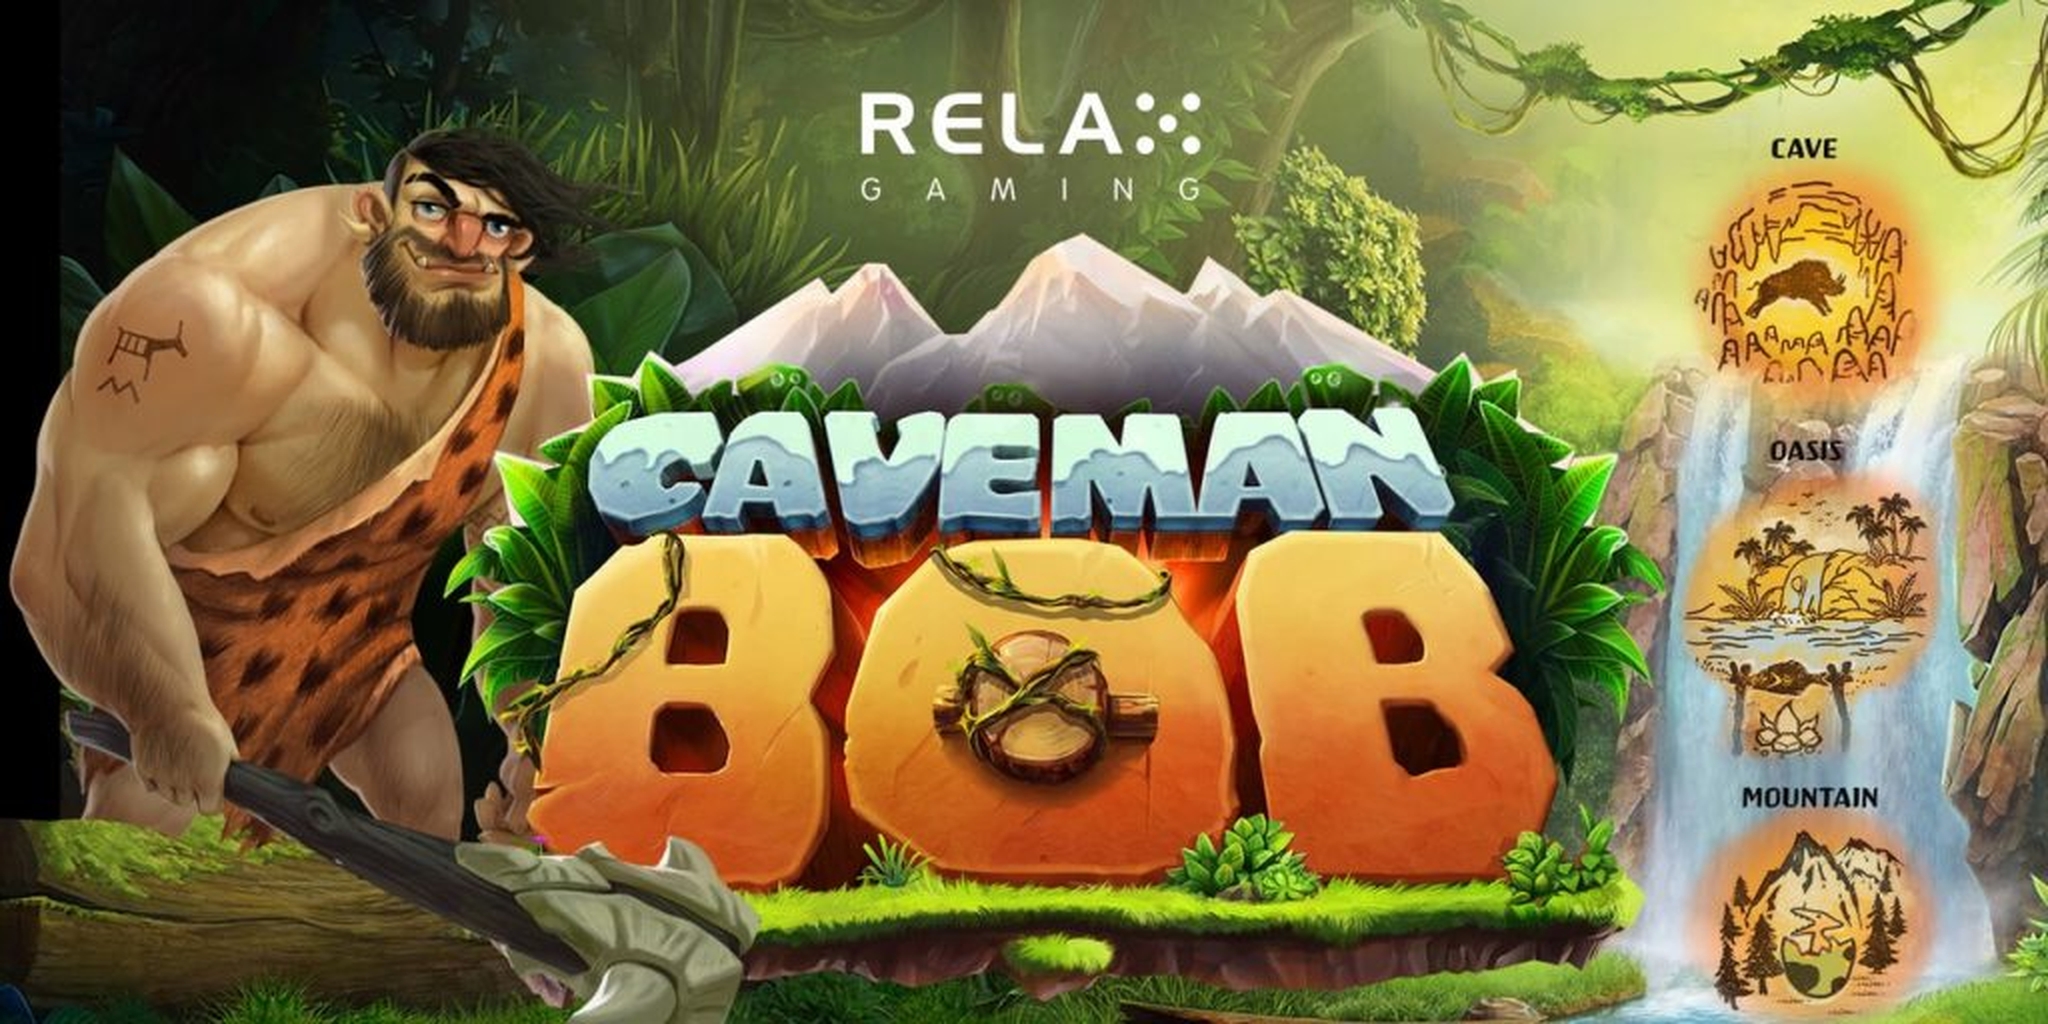 The Caveman Bob Online Slot Demo Game by Relax Gaming